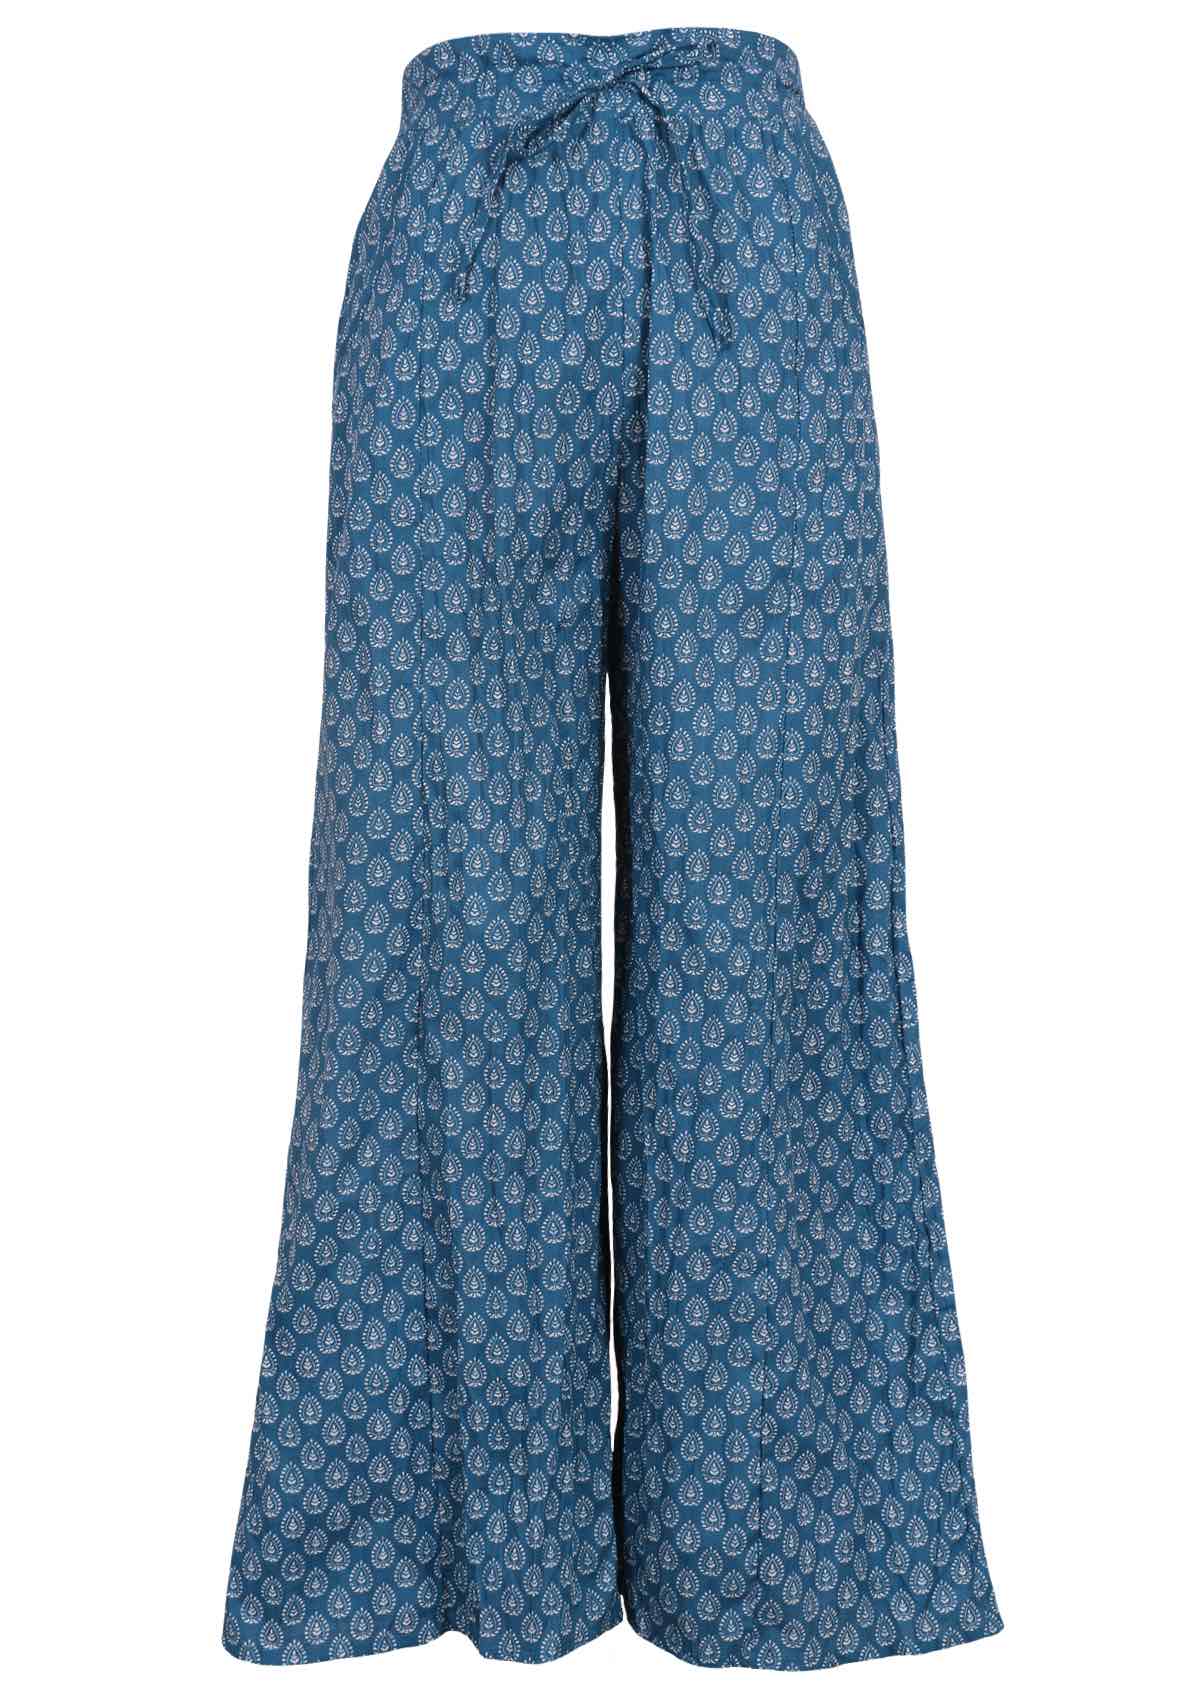 Elasticised waistband with a drawstring wide leg cotton pants